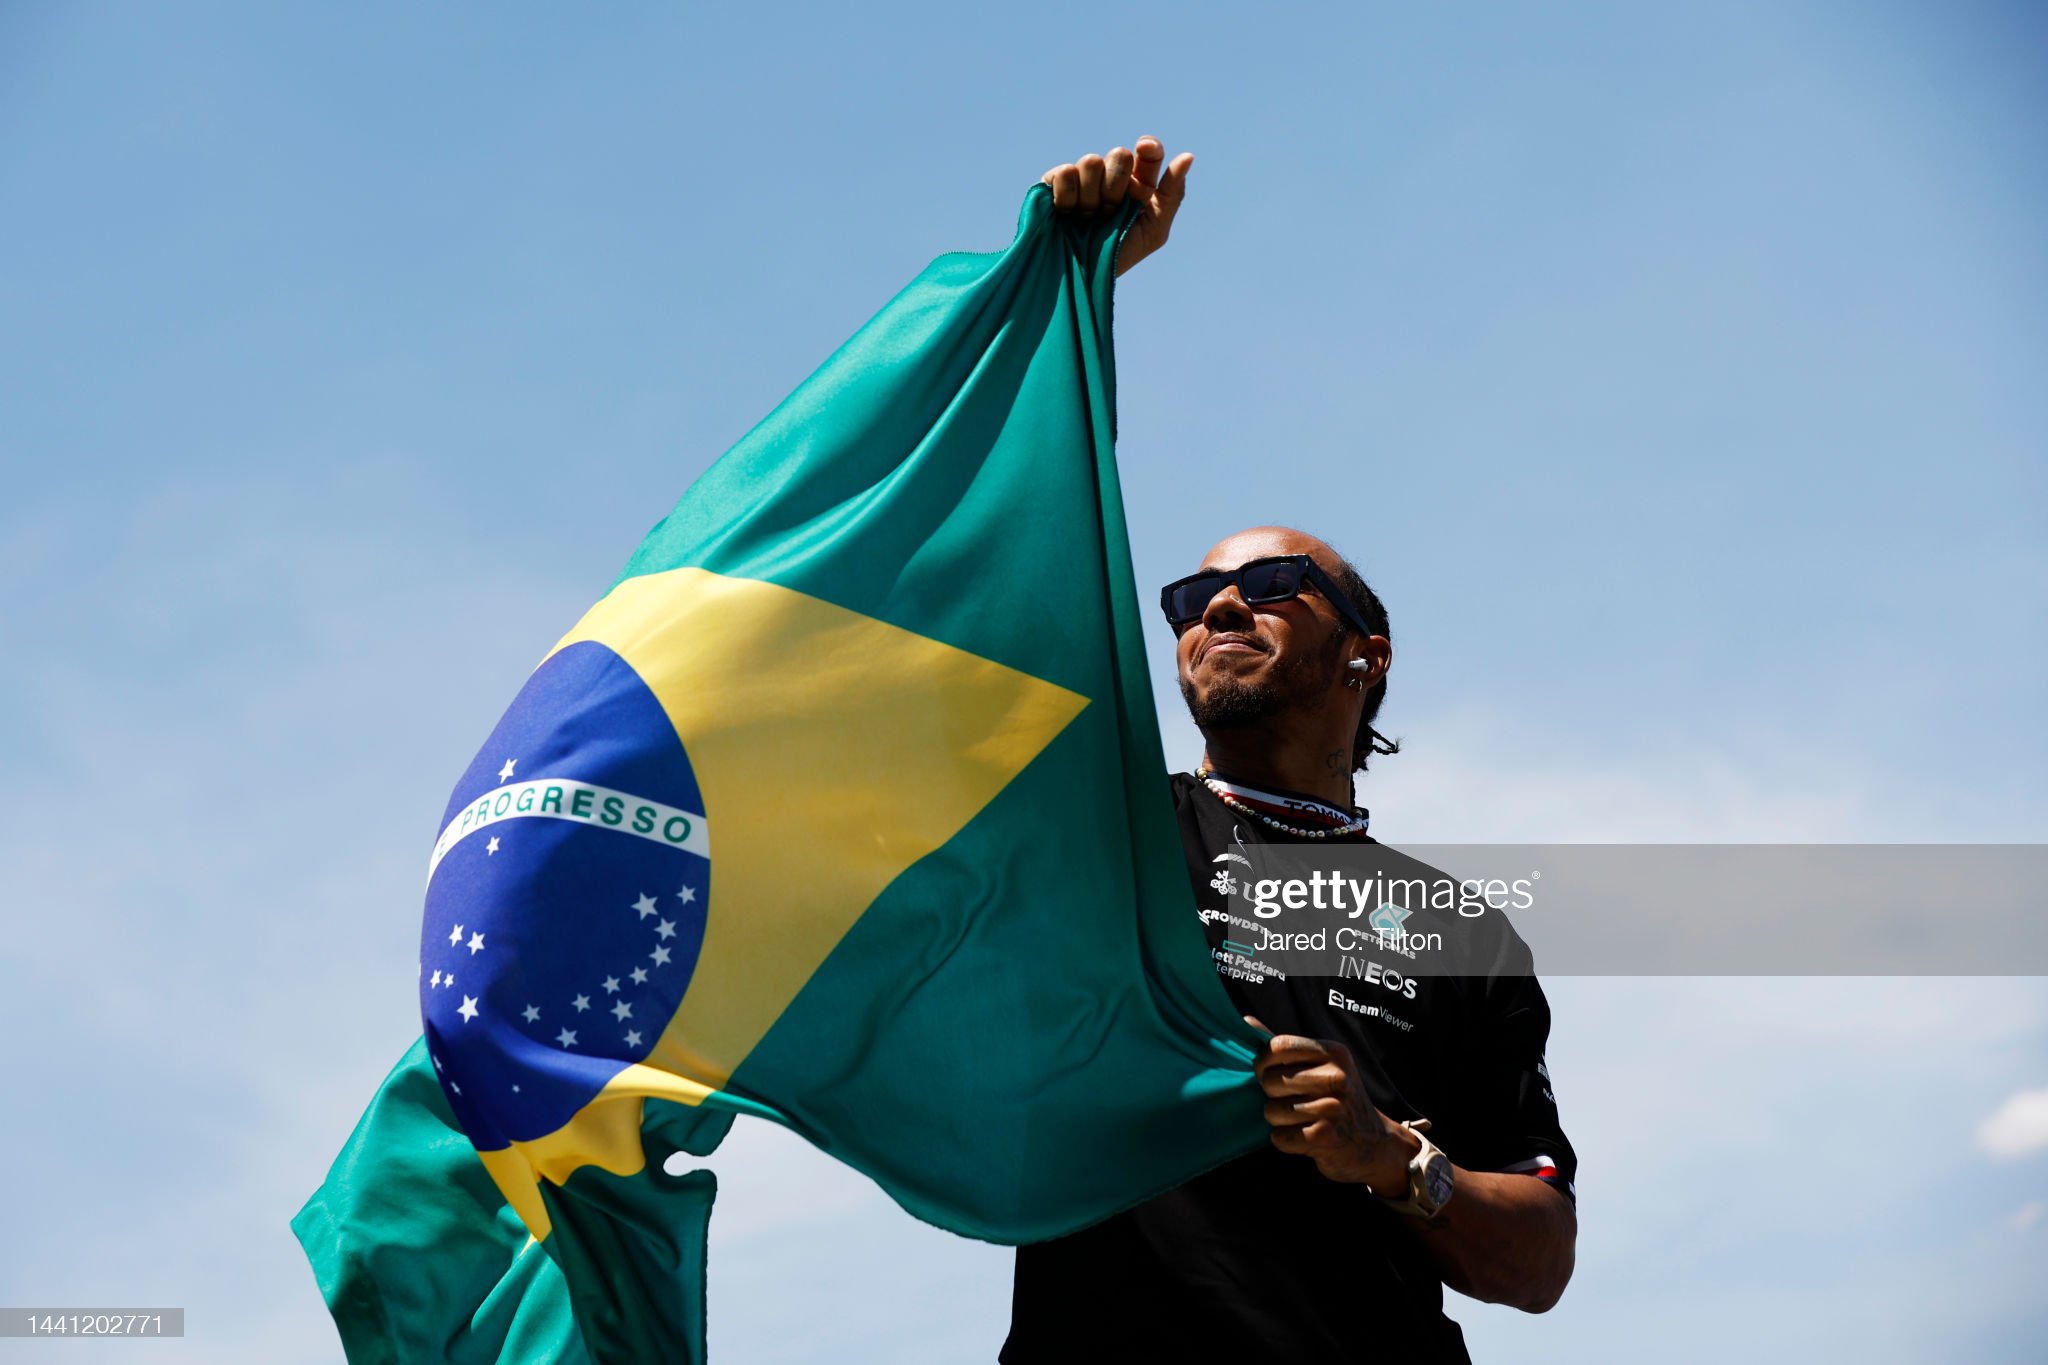 Lewis Hamilton of Great Britain and Mercedes waves to the crowd on the drivers’ parade prior to the F1 Grand Prix of Brazil.